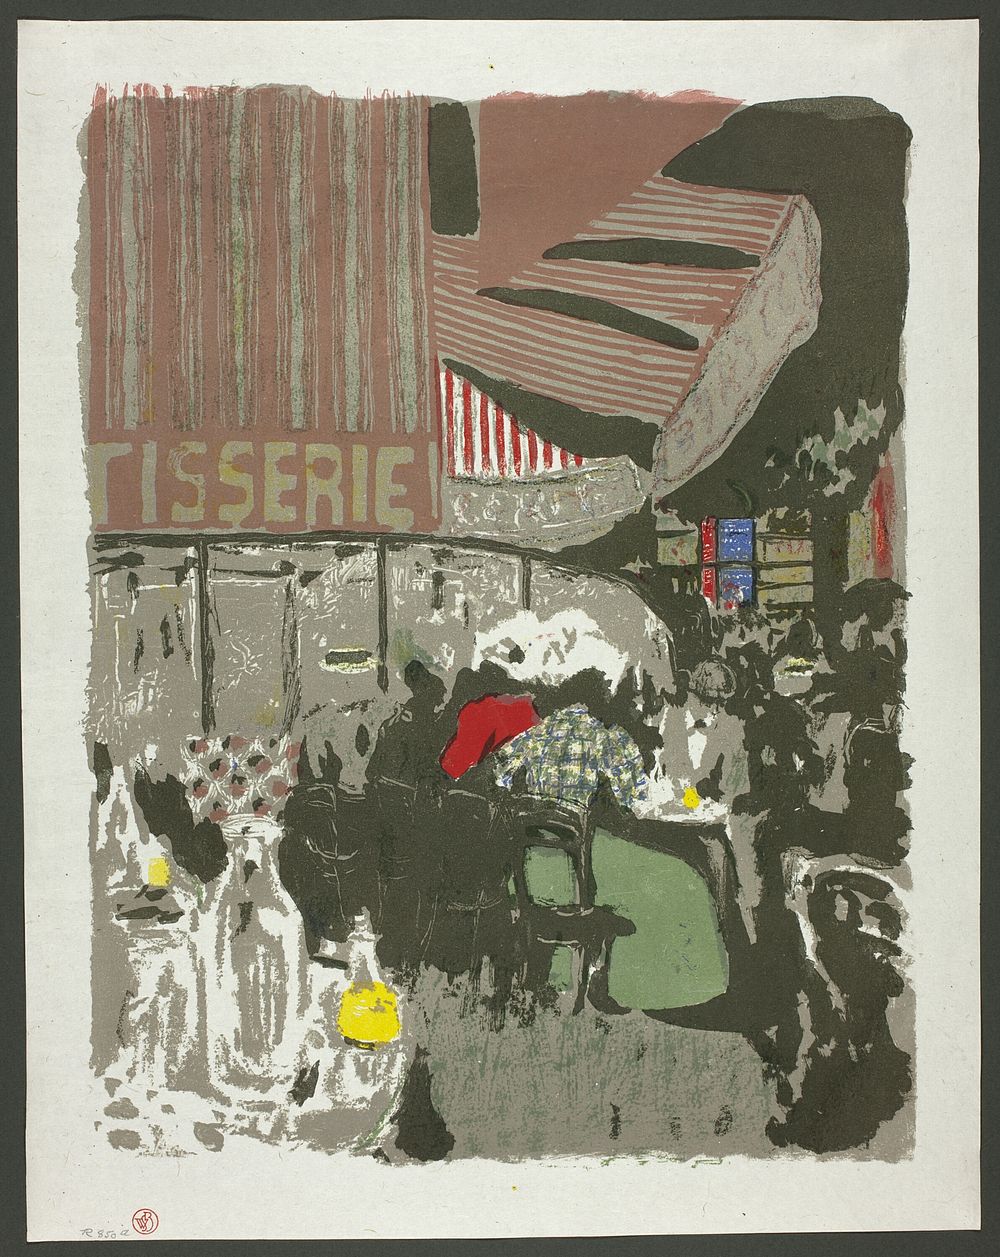 The Pastry Shop, plate ten from Landscapes and Interiors by Édouard Jean Vuillard